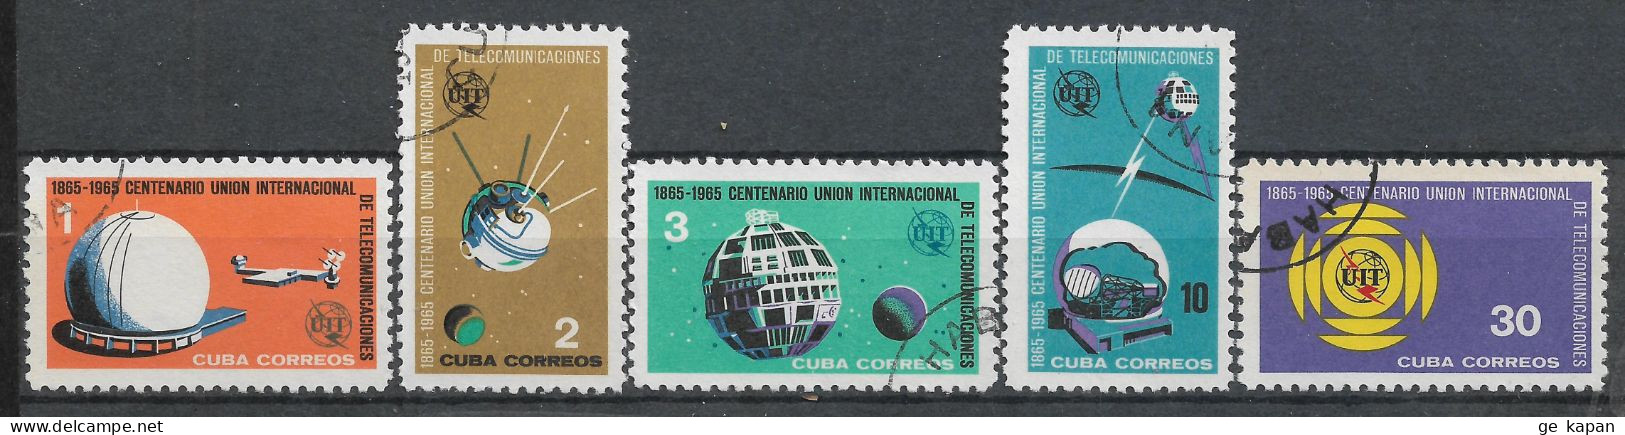 1965 CUBA COMPLETE SET OF 5 USED STAMPS (Michel # 1026-1030) CV €2.30 - Usati